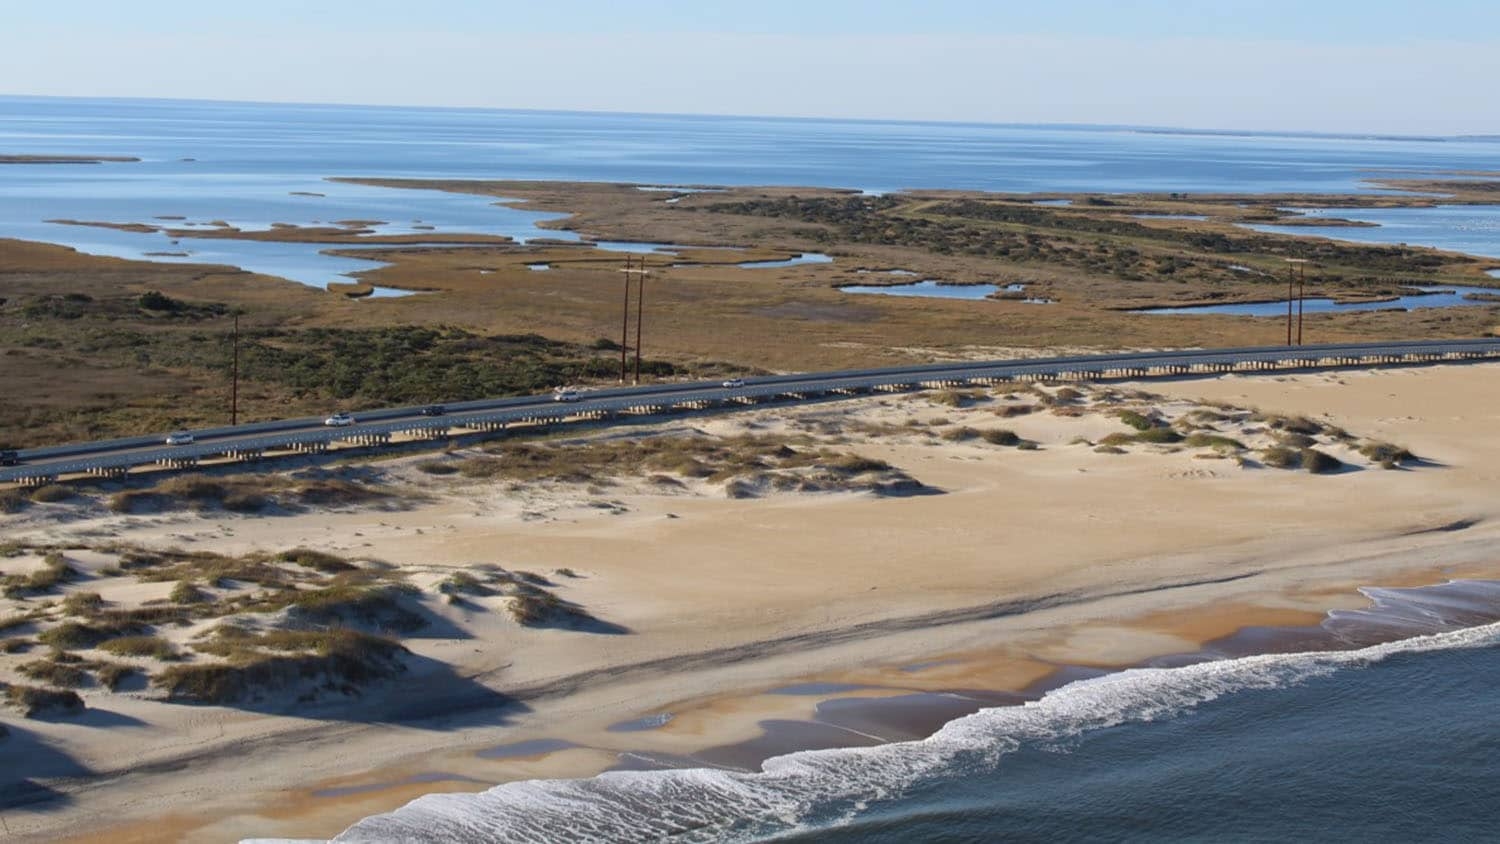 Aerial photograph of the ocean, beach, dunes, a highway, and then wetlands.